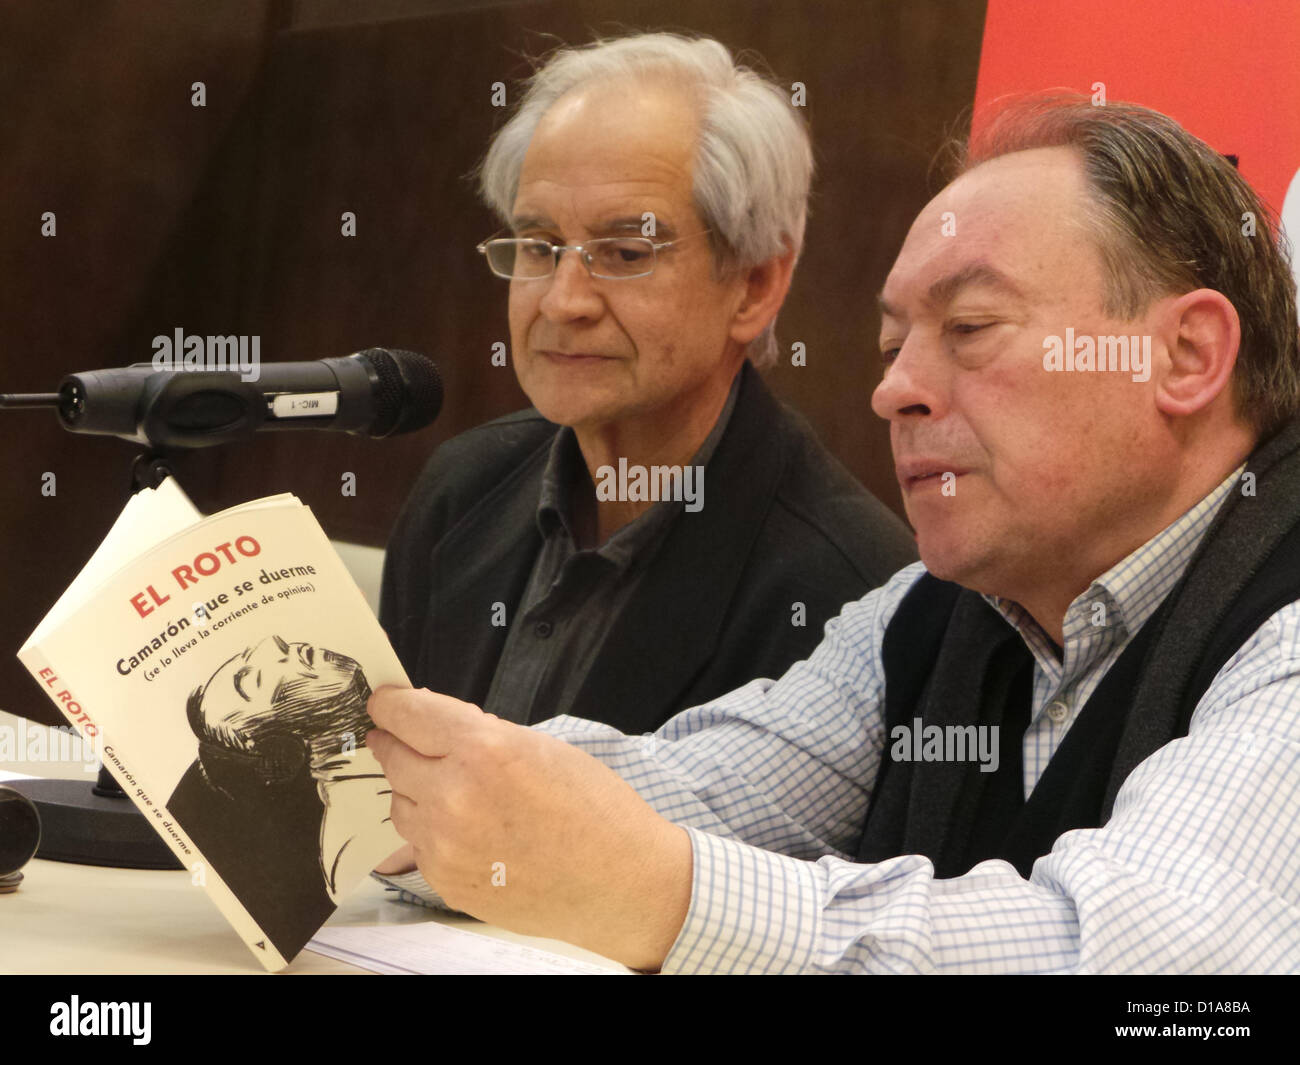 Barcelona, Spain. 12th December 2012. The cartoonist El Roto, Andrés García Rábago (left) from the newspaper El Pais, presents his book in Barcelona. On December 12 at the bookstore La Central has presented his book 'Shrimp that falls asleep (it carries the current)' - 'Camarón que se duerme (se lo lleva la corriente)-, a fierce critique of the media from this veteran cartoonist, with journalist Gregorio Morán (right). Stock Photo